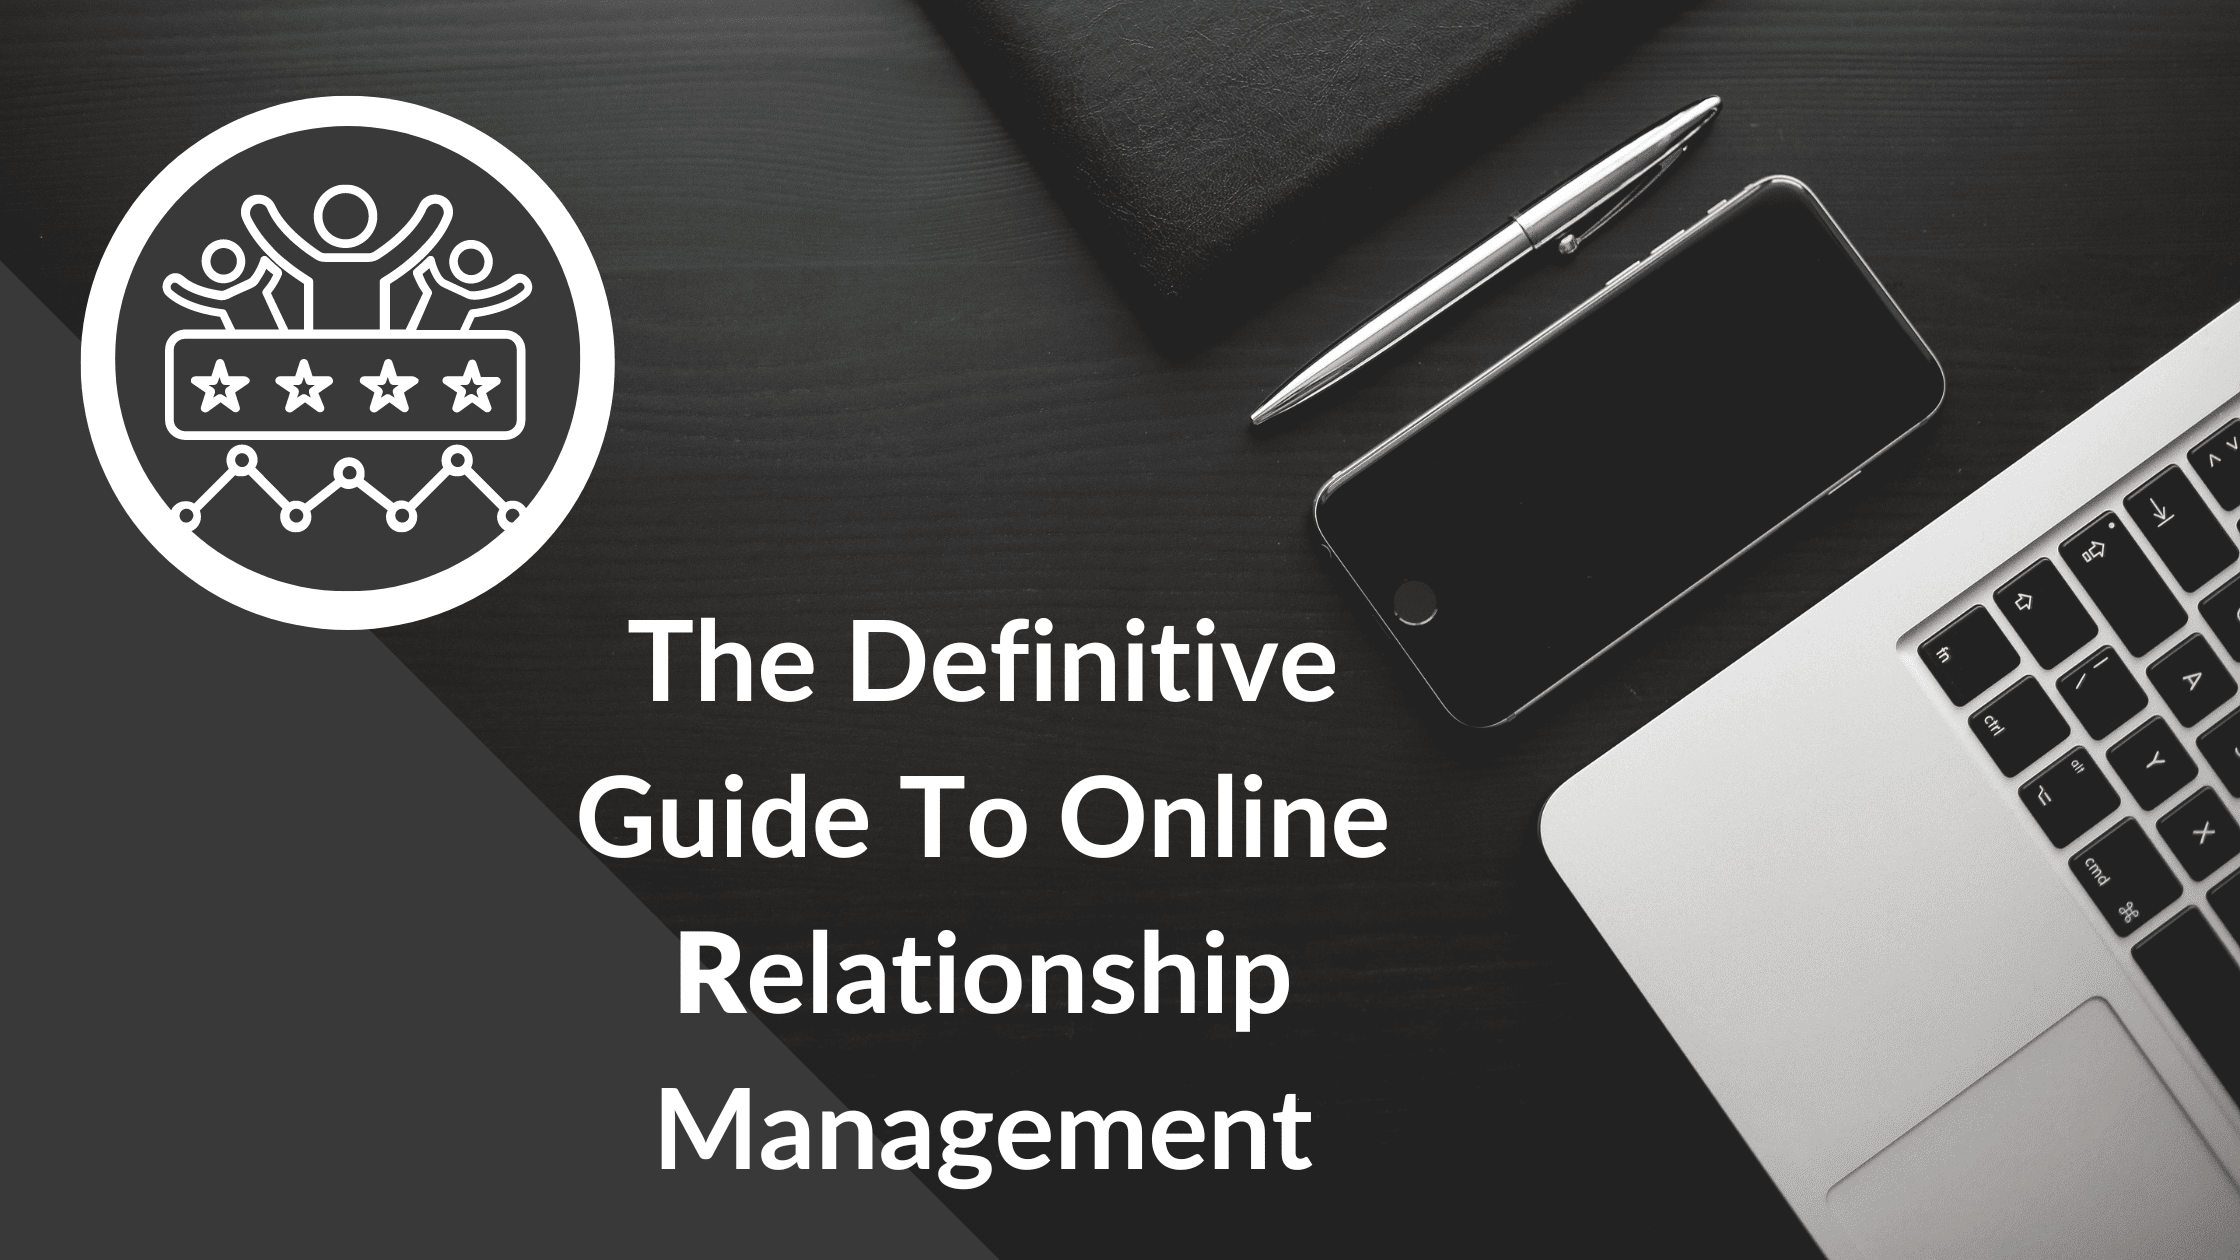 The Definitive Guide To Online Relationship Management